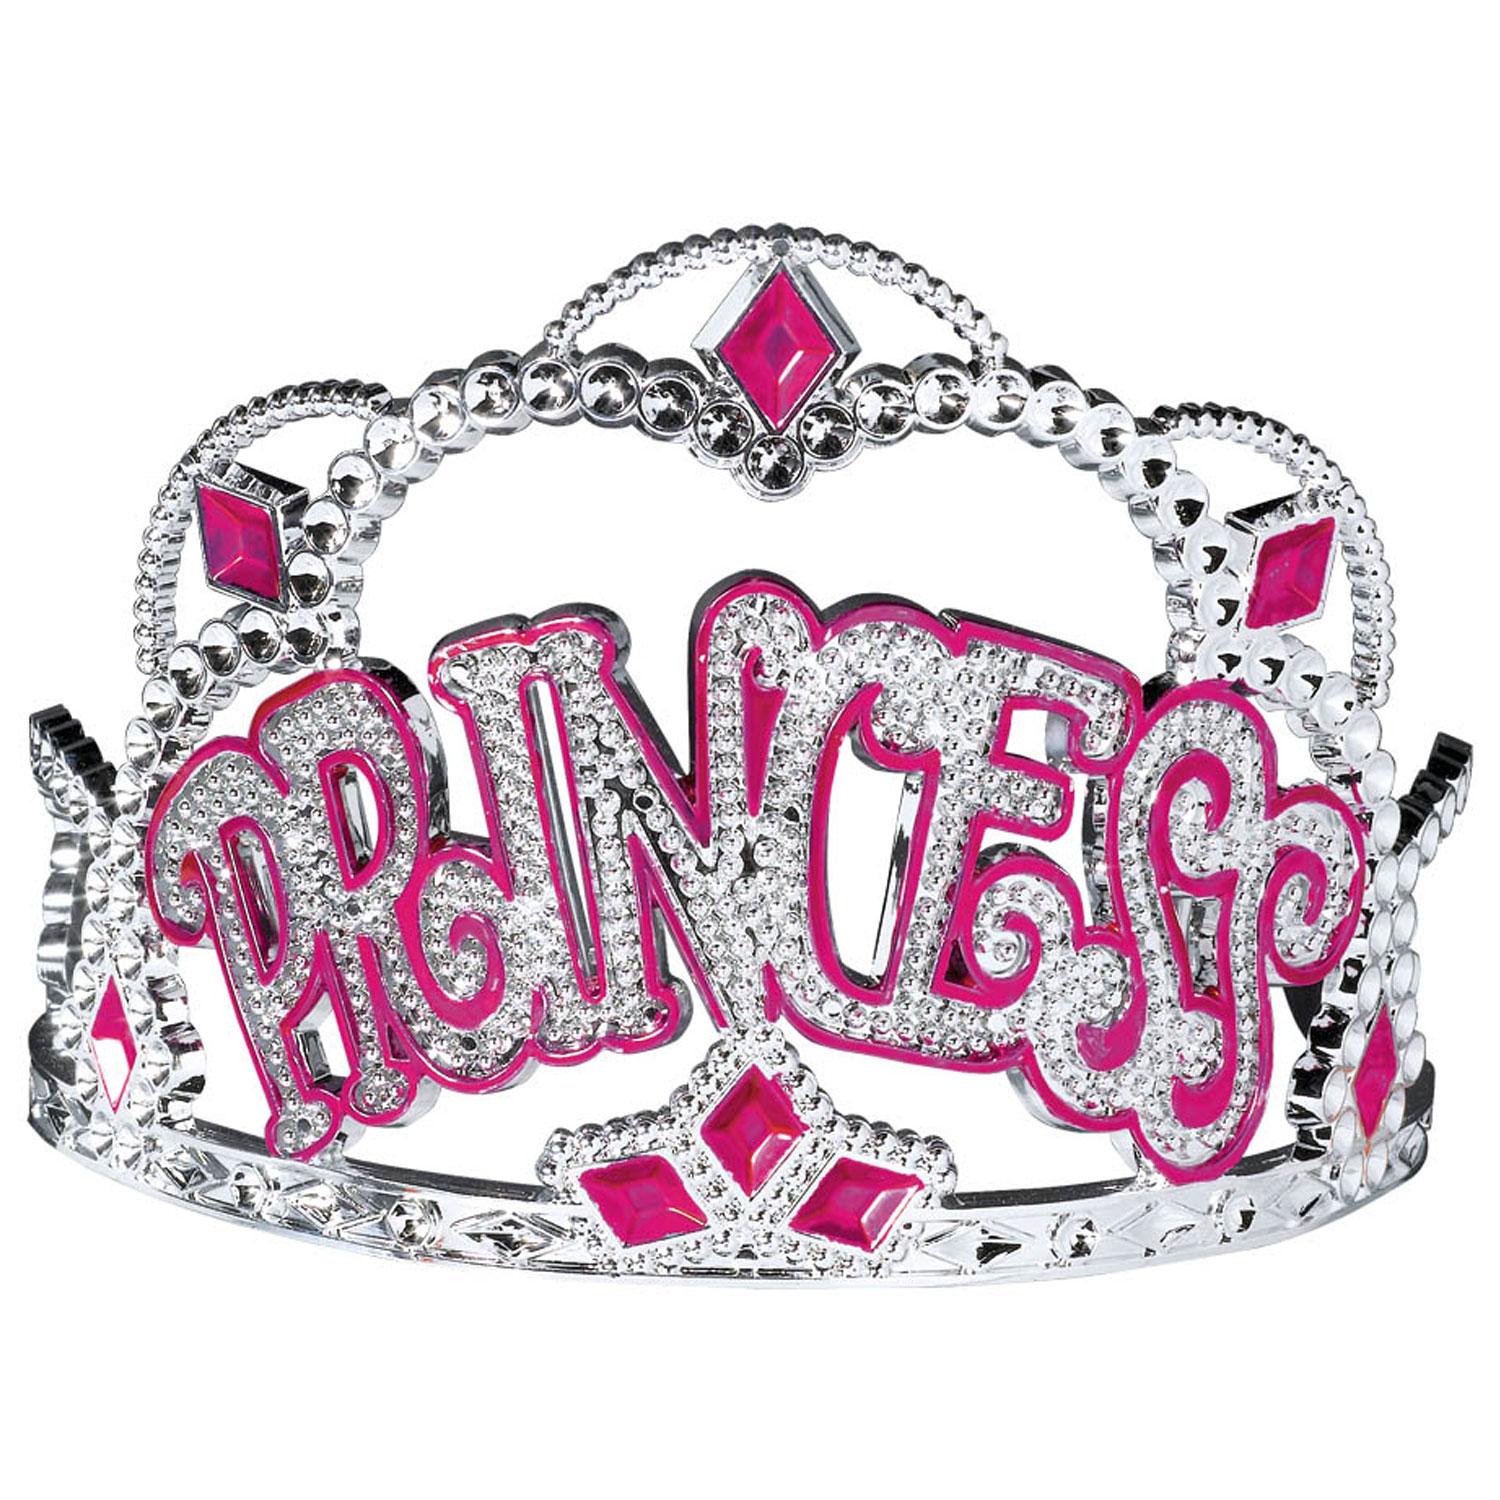 Princess Electroplated Tiara 3.5 x 4.5in Costumes & Apparel - Party Centre